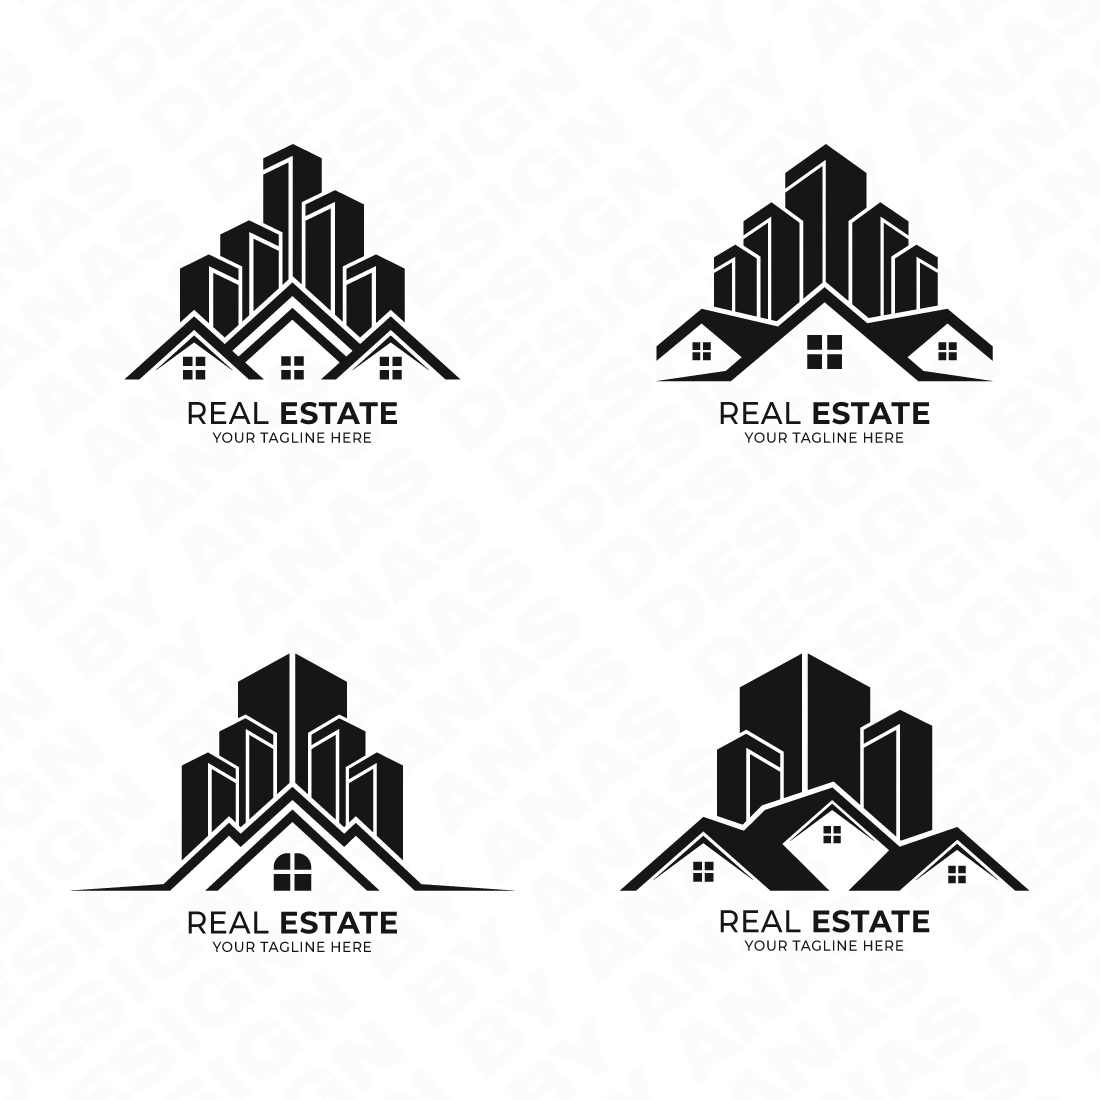 4 Luxury Real Estate Logos Design, Building Logos Bundle Template – ONLY $20 preview image.